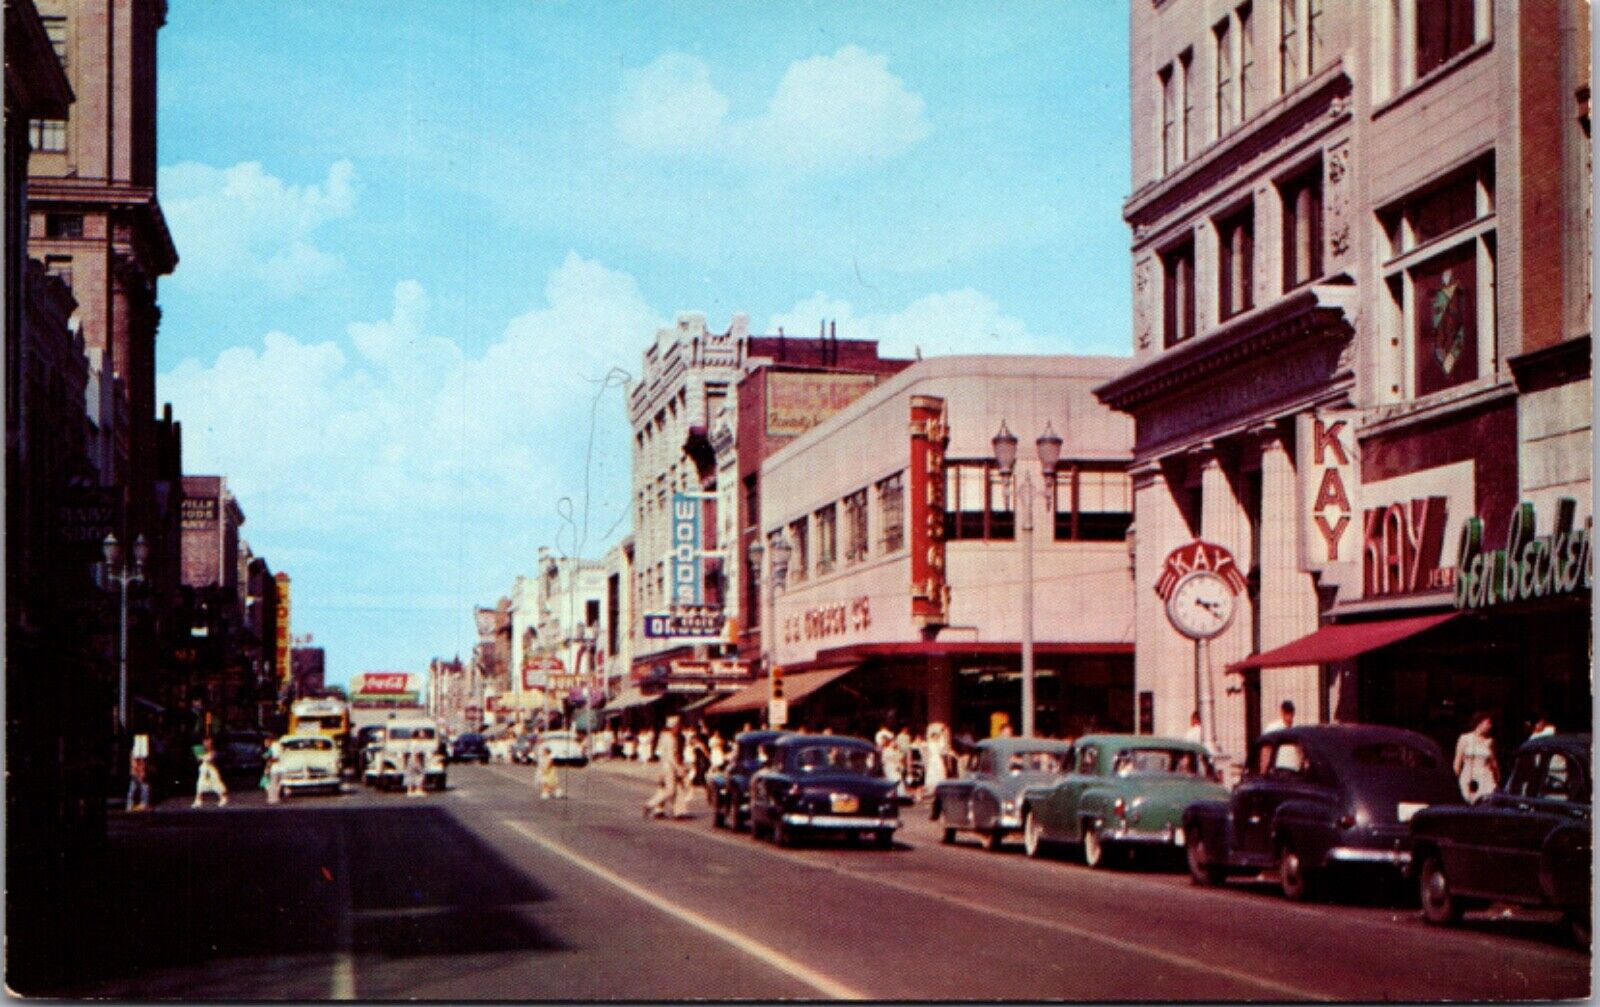 Postcard Looking Northeast on Main Street in Downtown, Evansville, Indiana